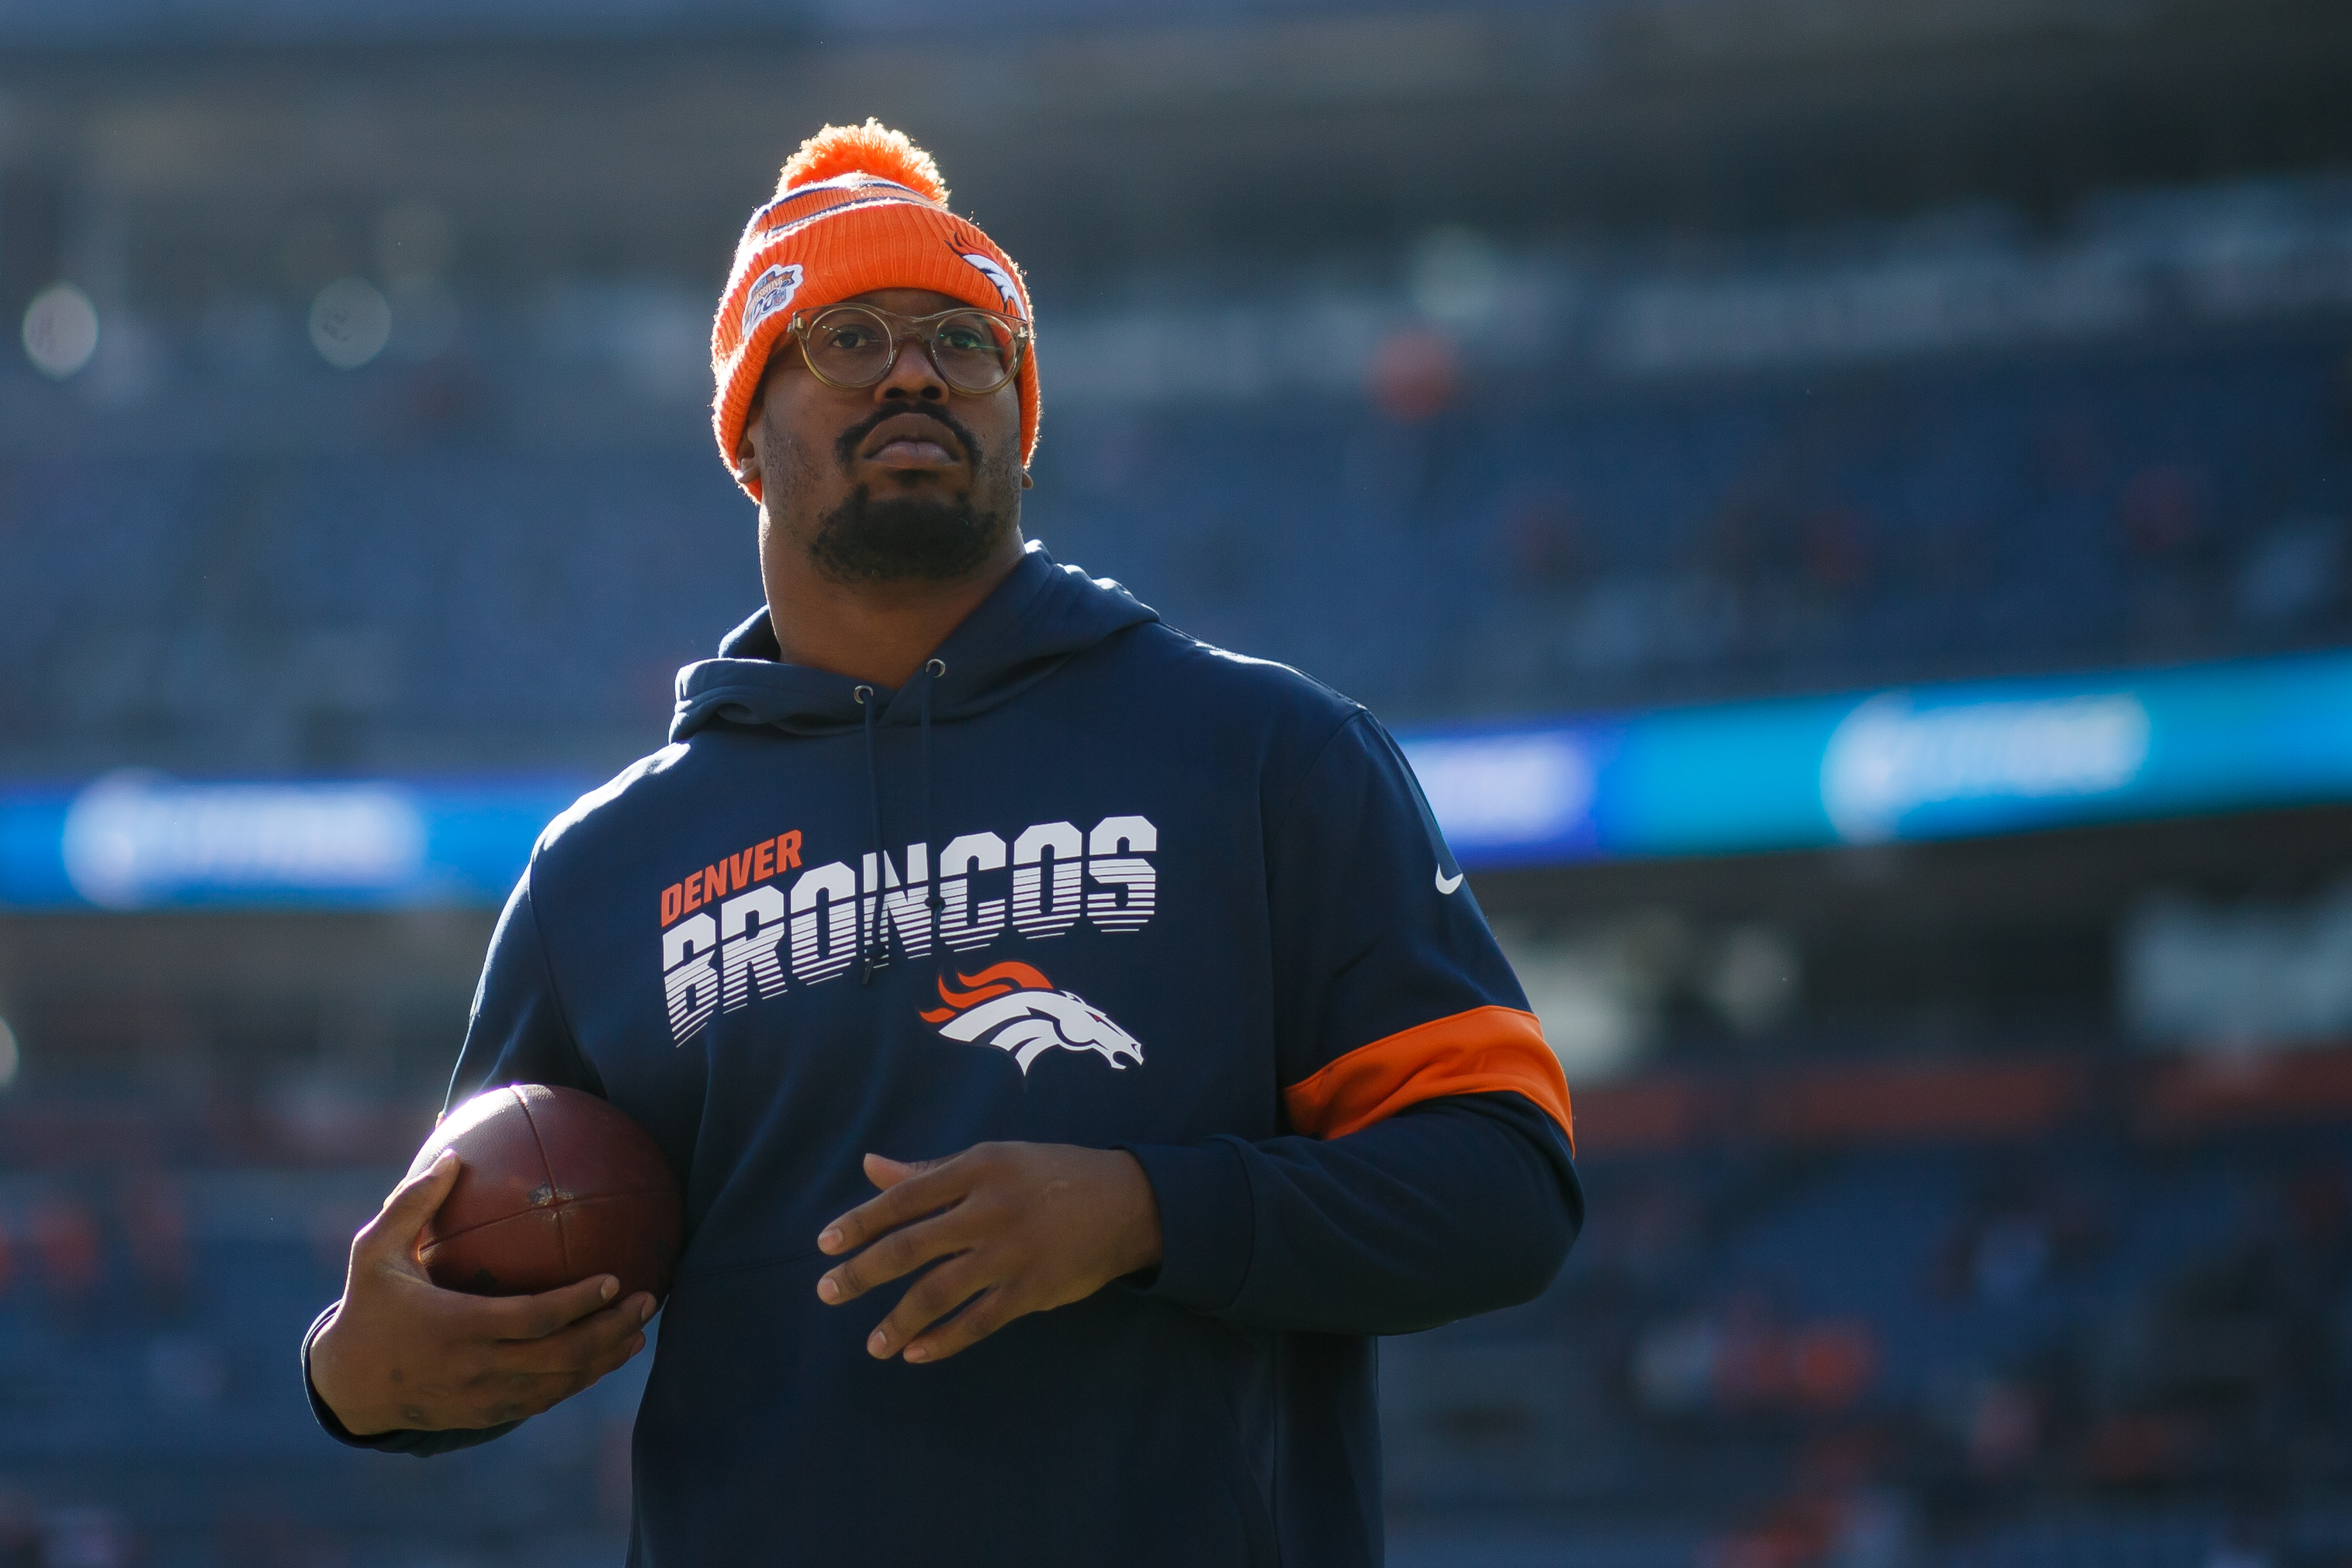 Linebacker Von Miller of the Denver Broncos stands on the field during warmups before a game against the Los Angeles Chargers at Empower Field at Mile High on December 1, 2019.